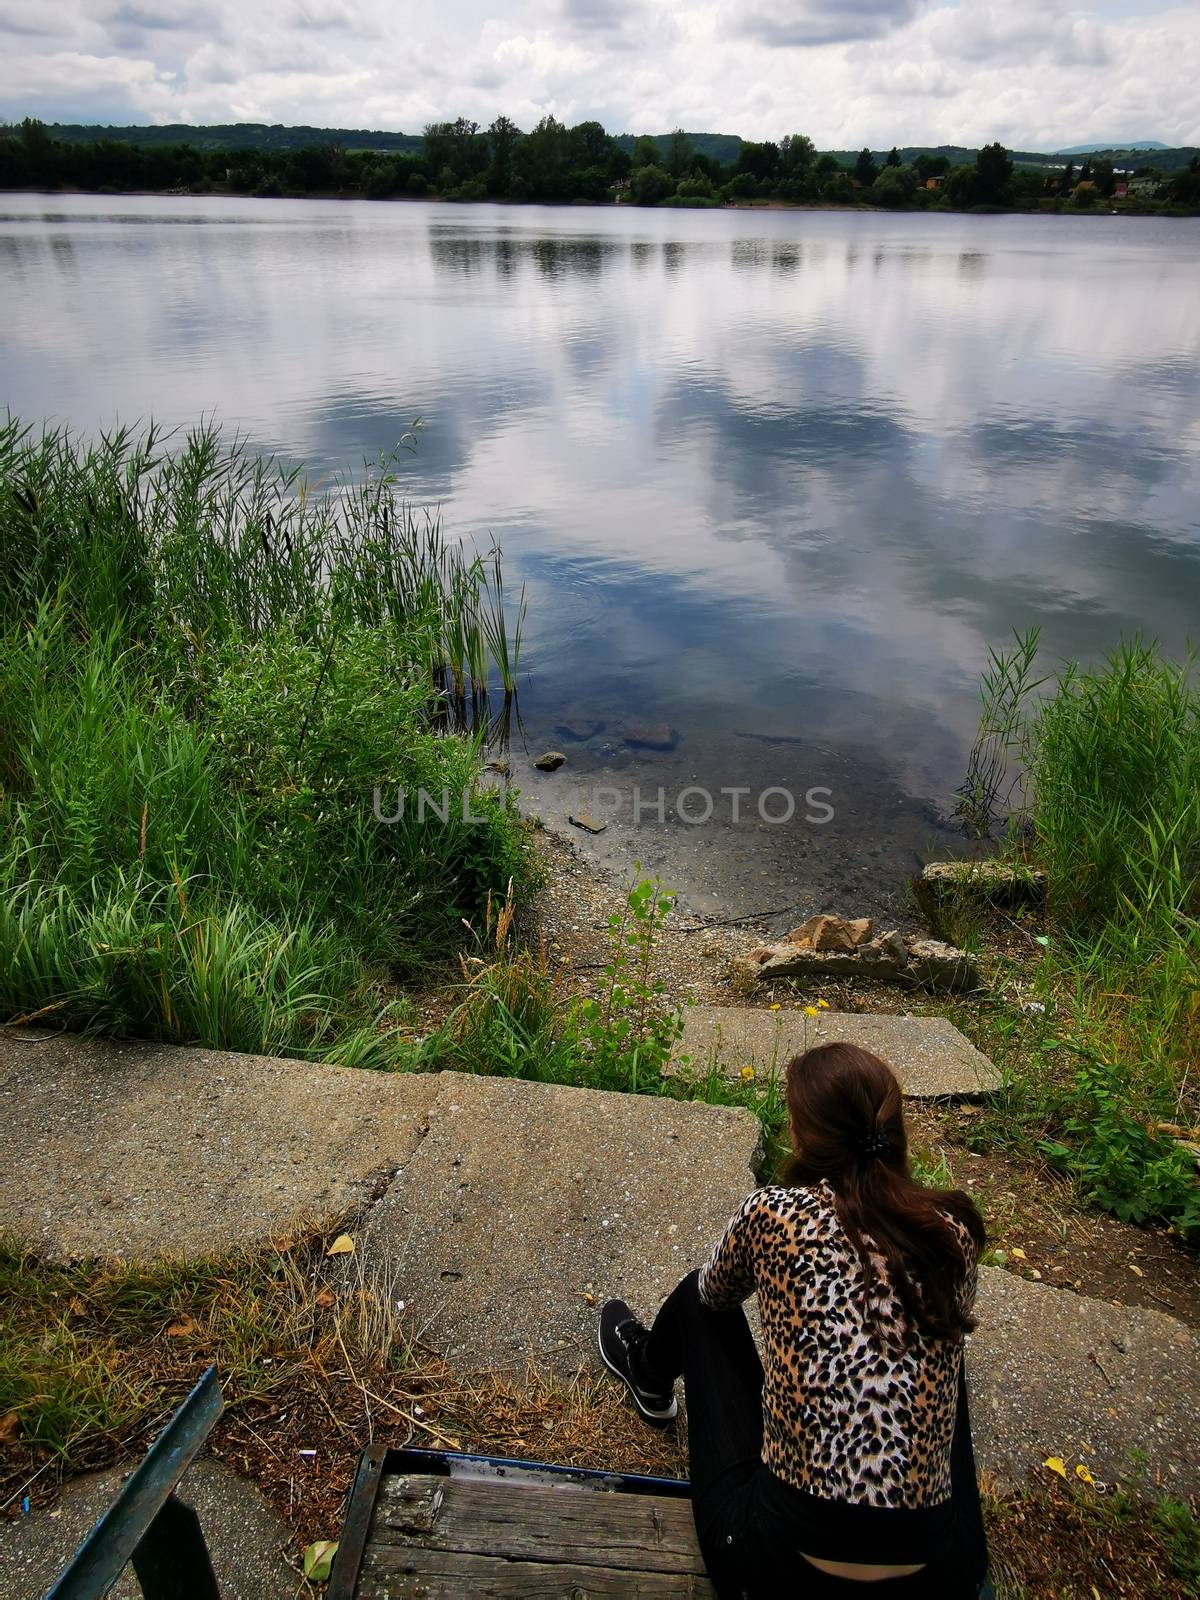 A woman standing in front of a body of water. High quality photo